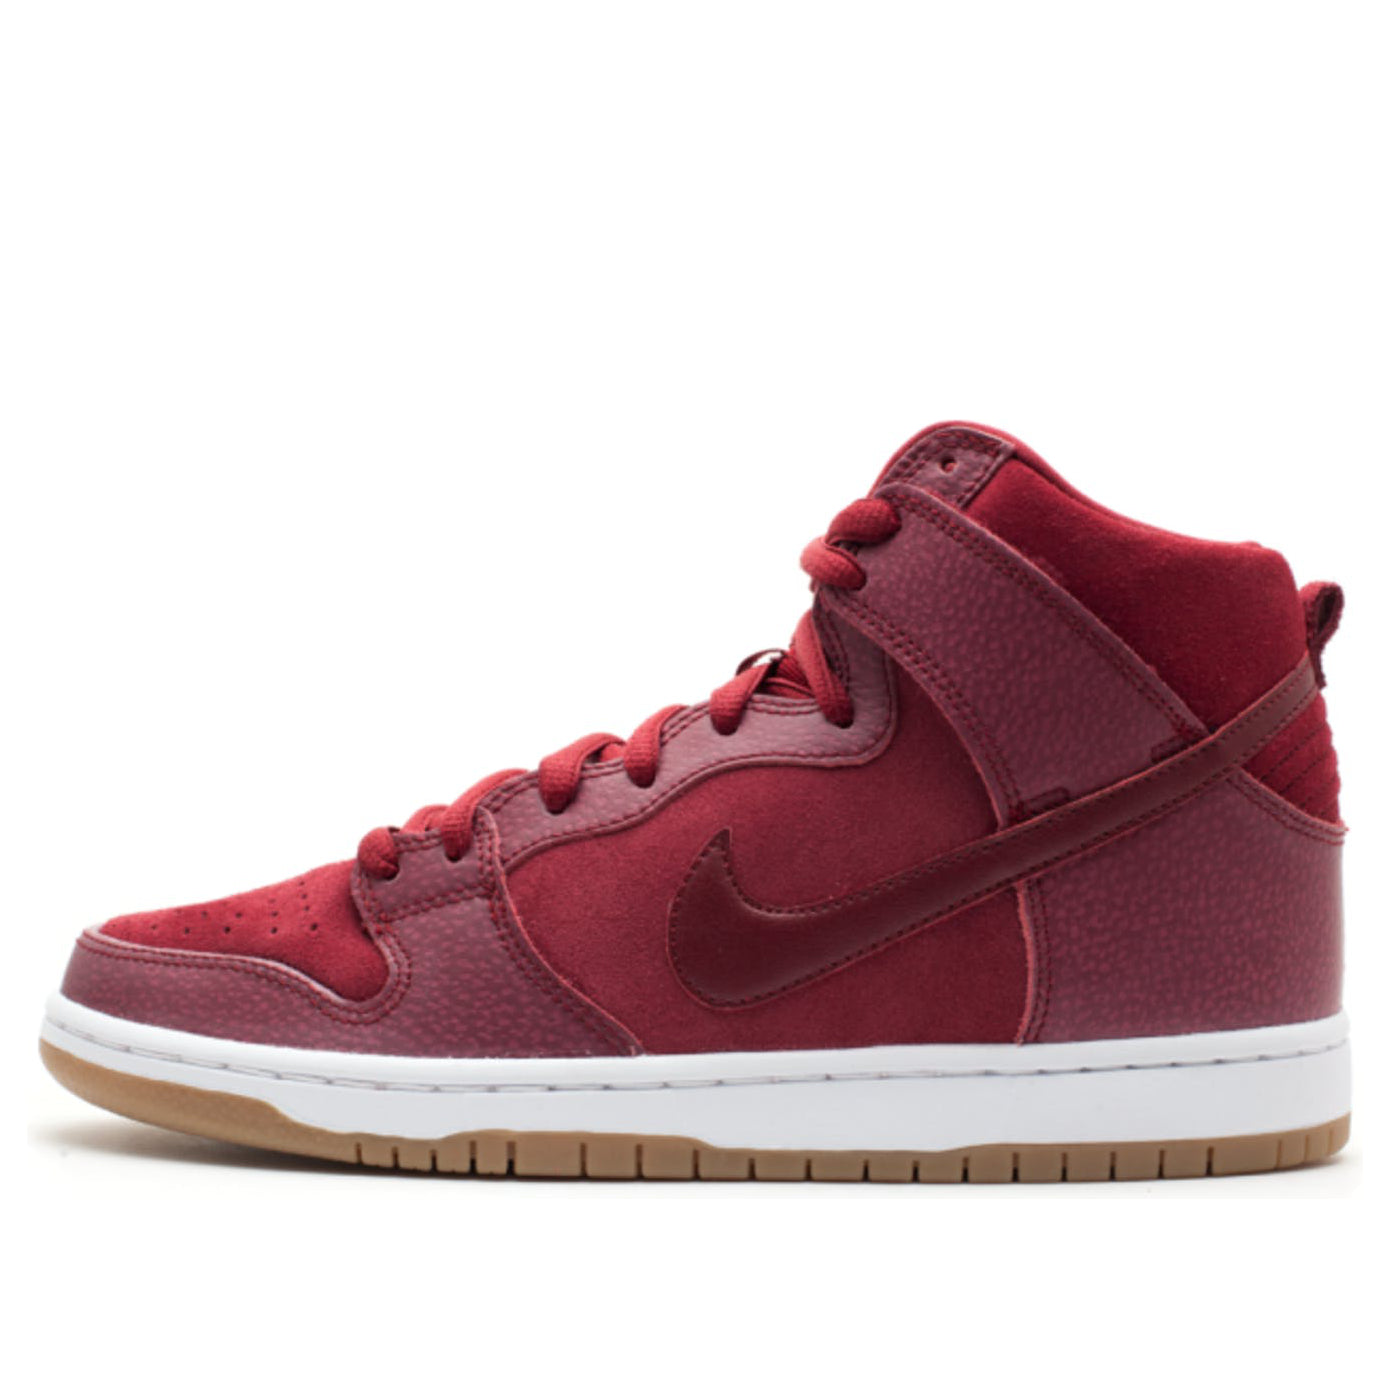 Nike Dunk High Pro Sb 'Red Maroon'  305050-662 Classic Sneakers